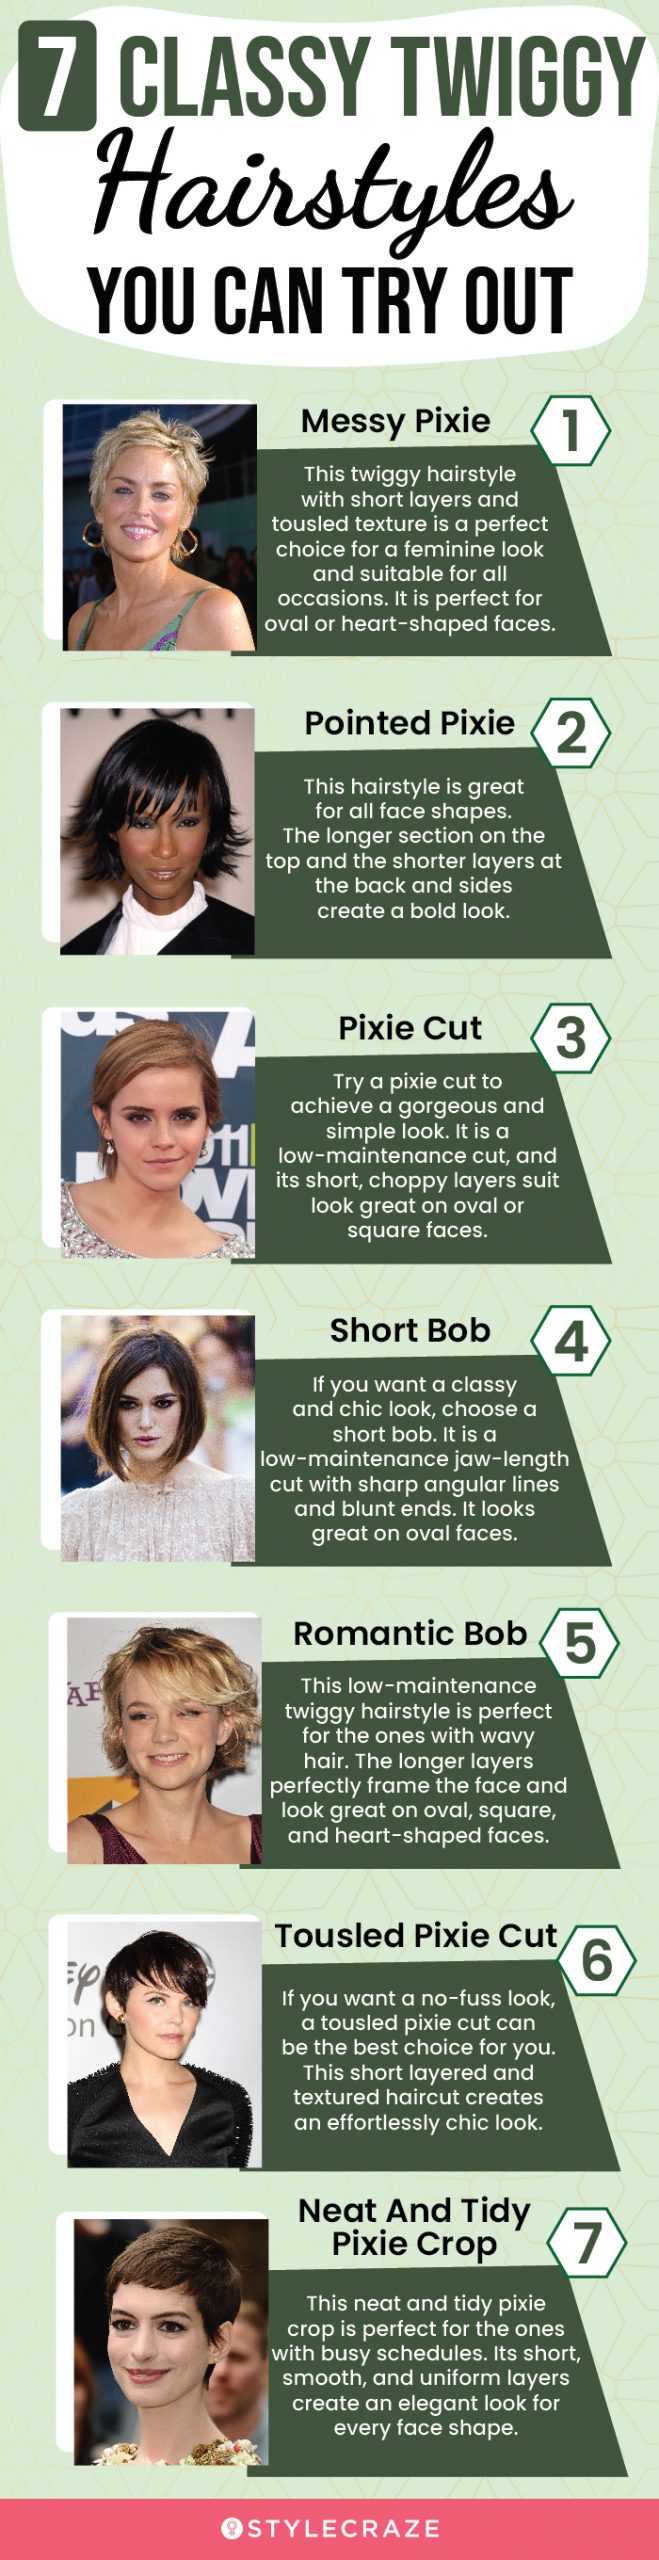 7 classy twiggy hairstyles you can try out (infographic)